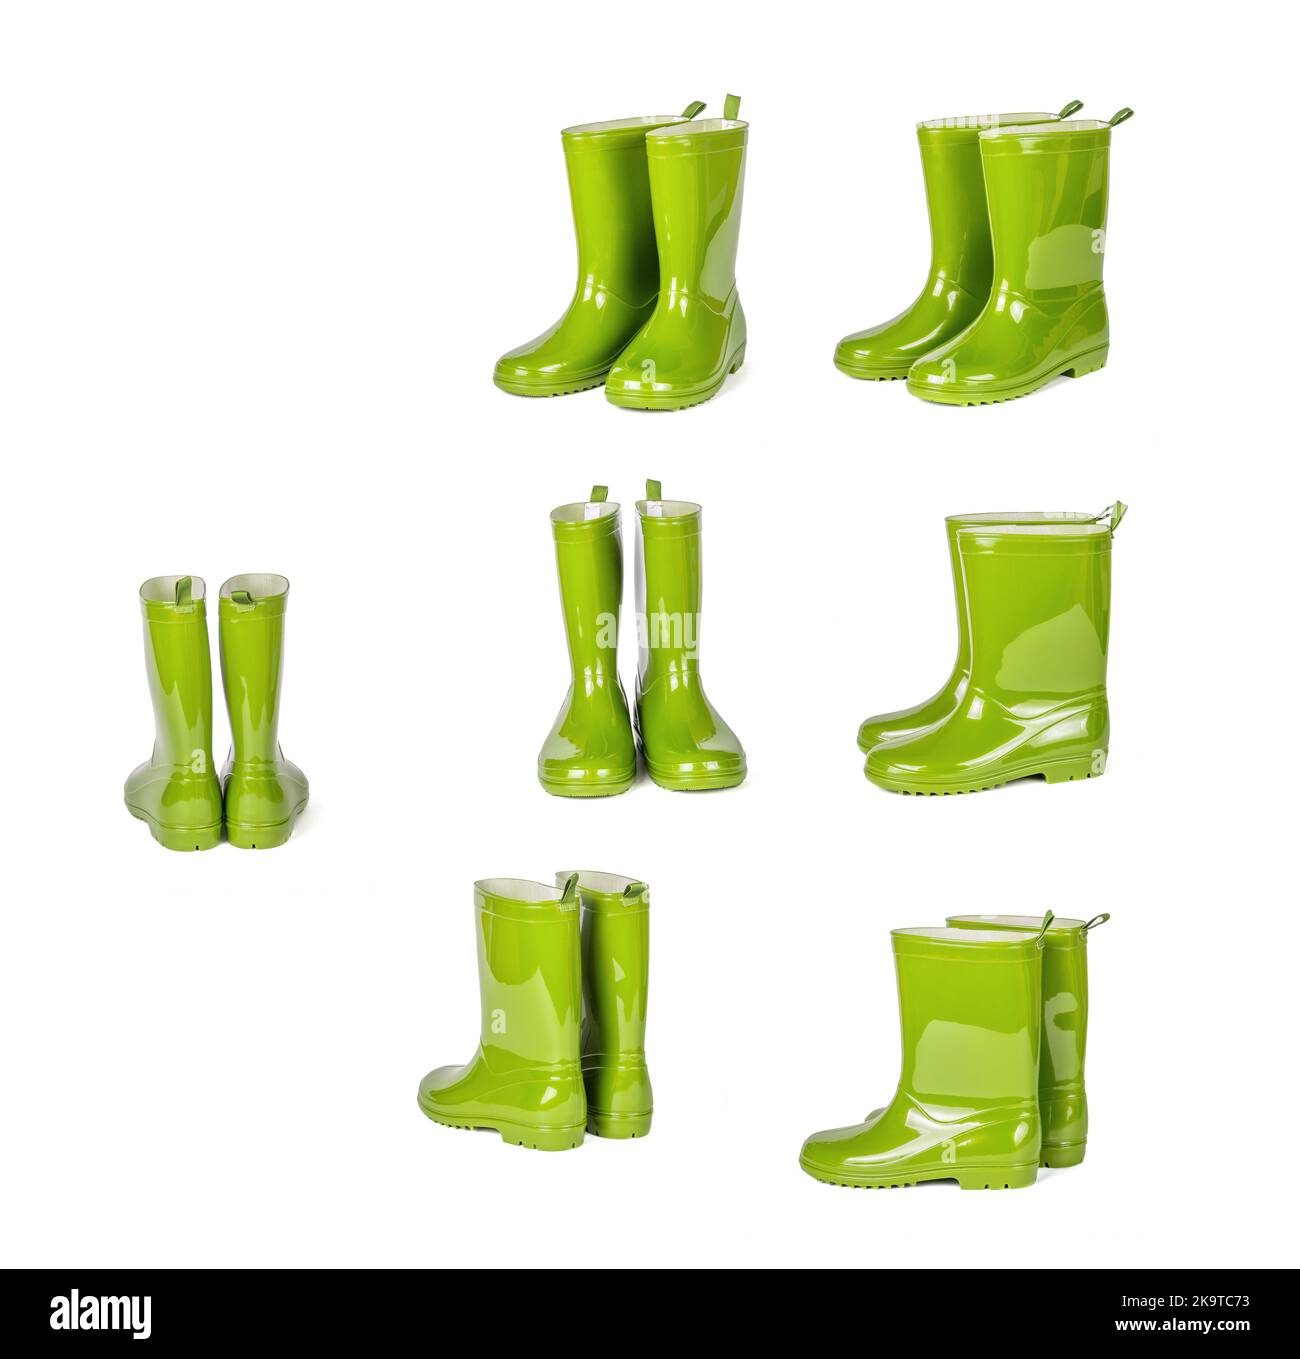 Set of green rubber boots isolated on white background. Stock Photo